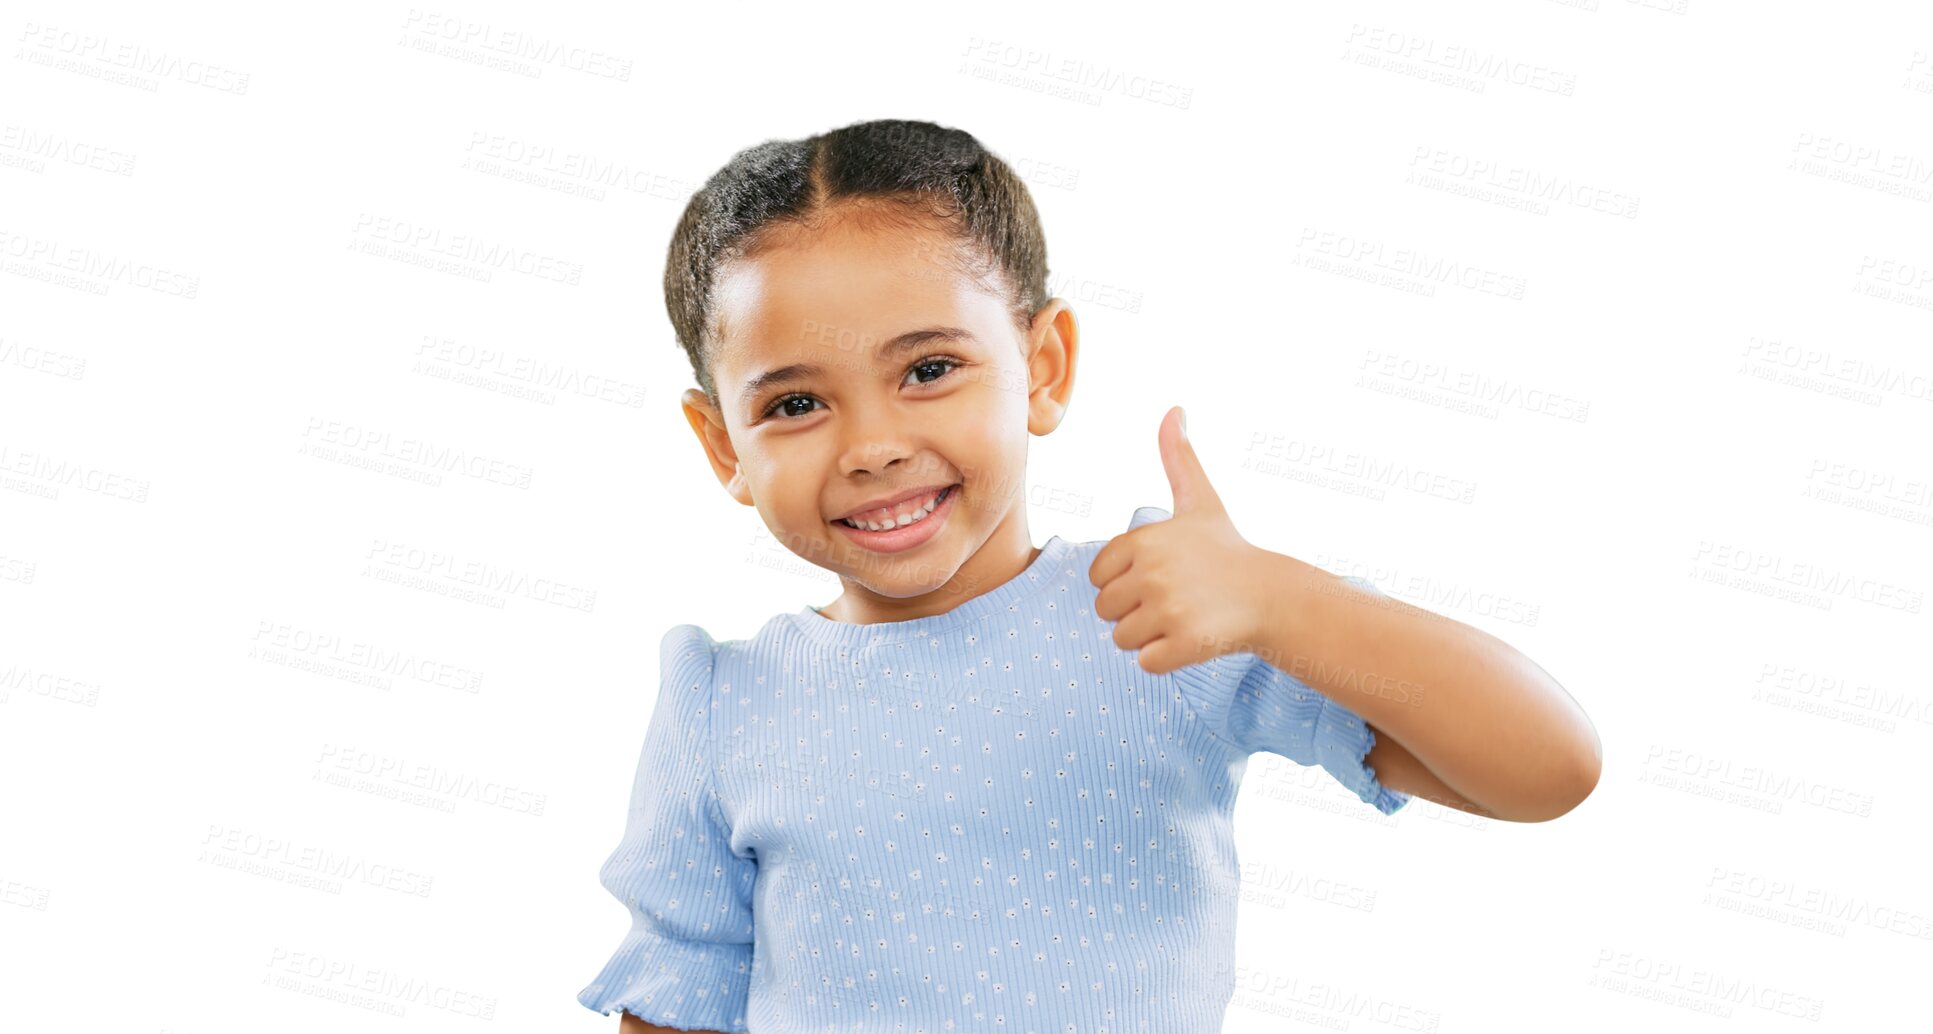 Buy stock photo Happy little girl, portrait and thumbs up in agreement or winning isolated on a transparent PNG background. Young child or kid smile with hands in like emoji, yes sign or OK for approval or thank you